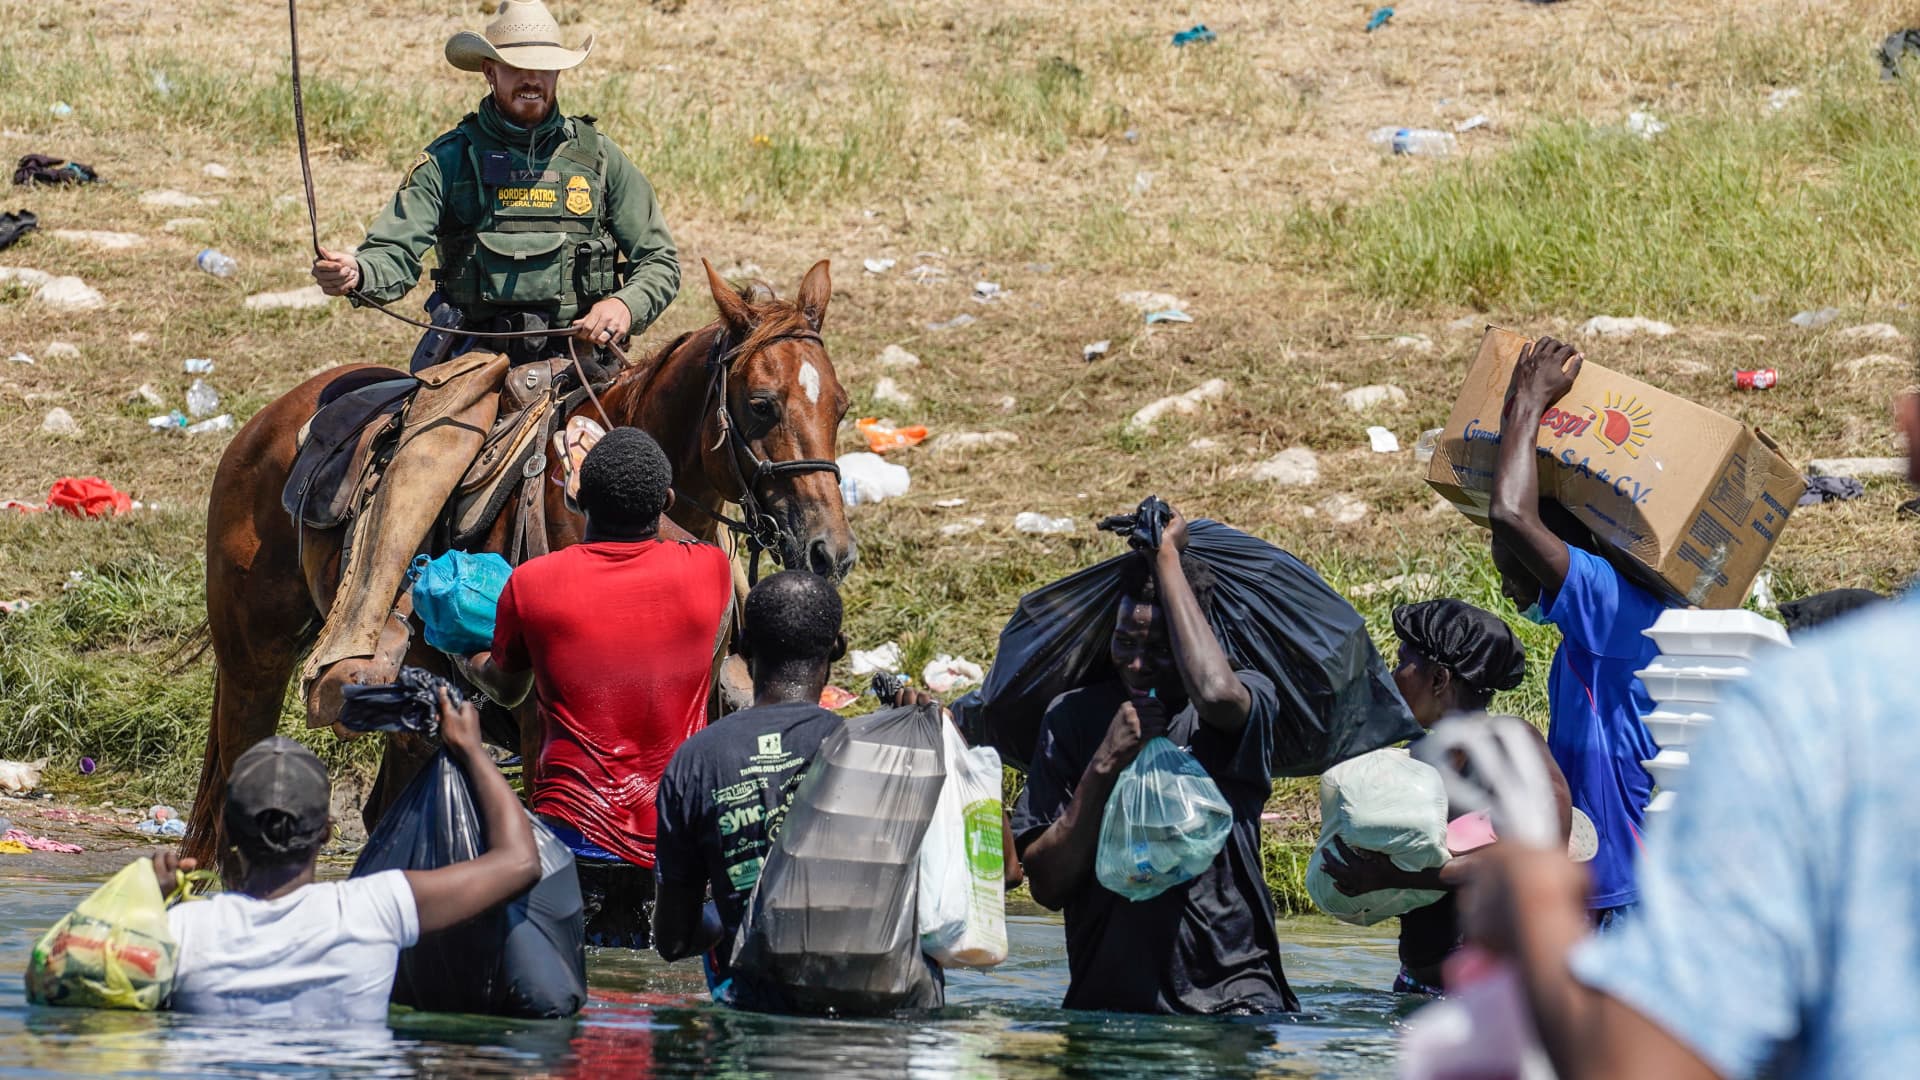 A United States Border Patrol agent on horseback uses the reins as he tries to stop Haitian migrants from entering an encampment on the banks of the Rio Grande near the Acuna Del Rio International Bridge in Del Rio, Texas on September 19, 2021.